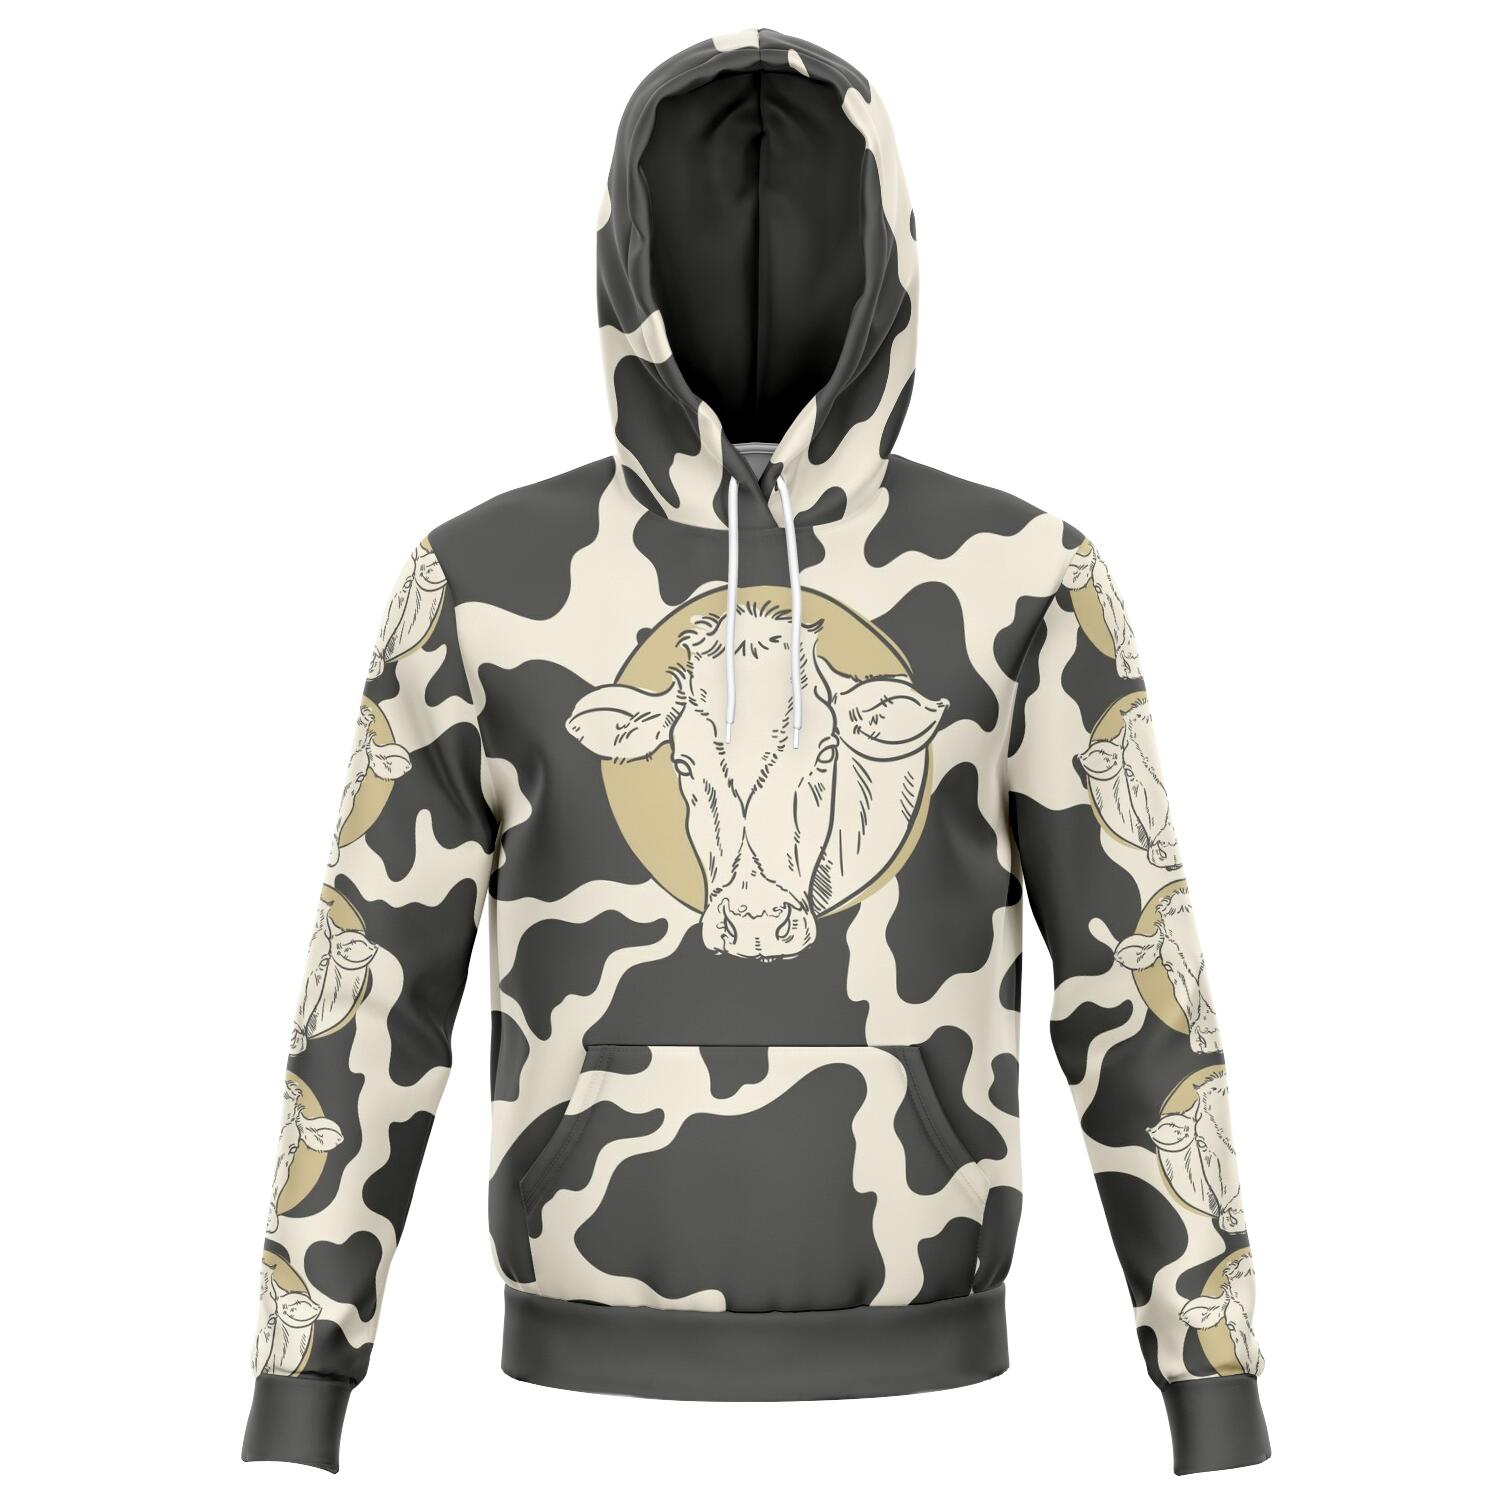 Tinted Cow Print Hoodie CL1211 XS Official COW PRINT Merch